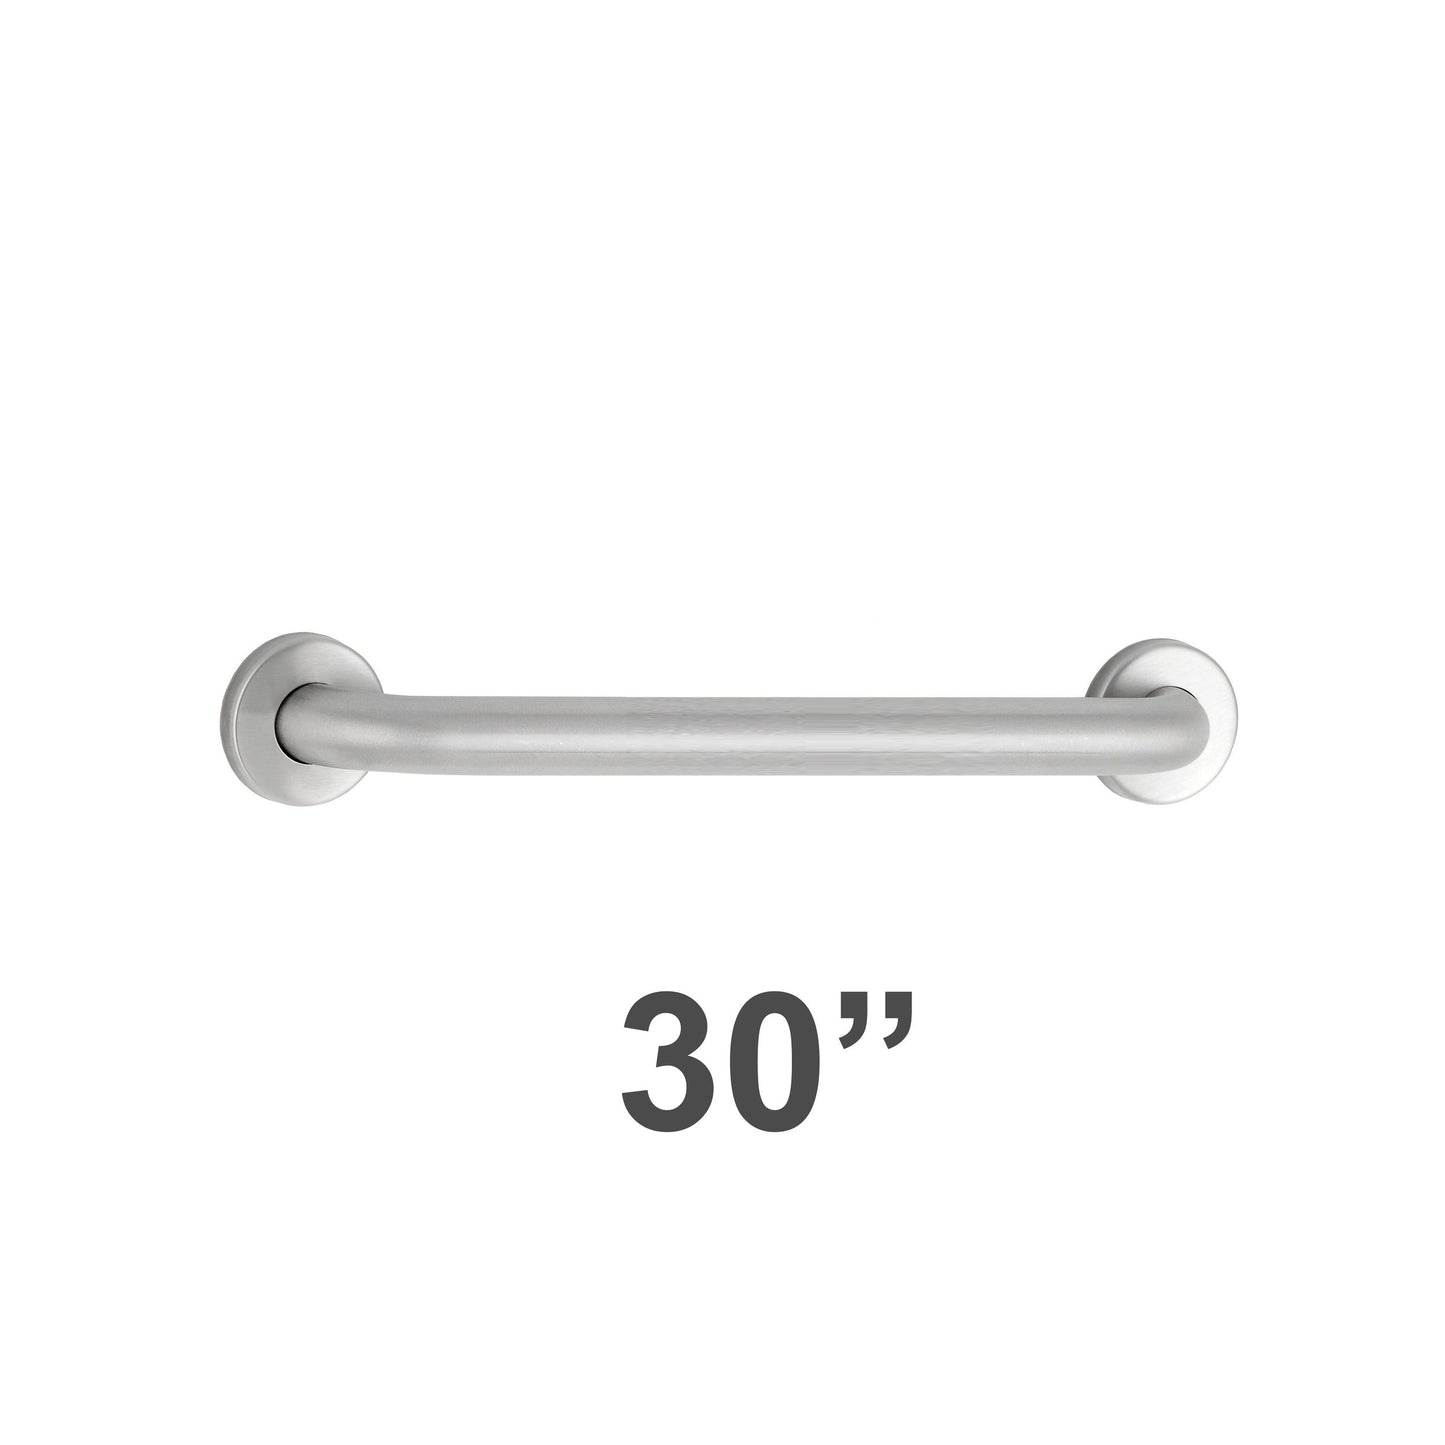 Bobrick 6806x30 - 1/2" Diameter x 30" Length  Straight Grab Bar with Concealed Mounting Snap Flange-